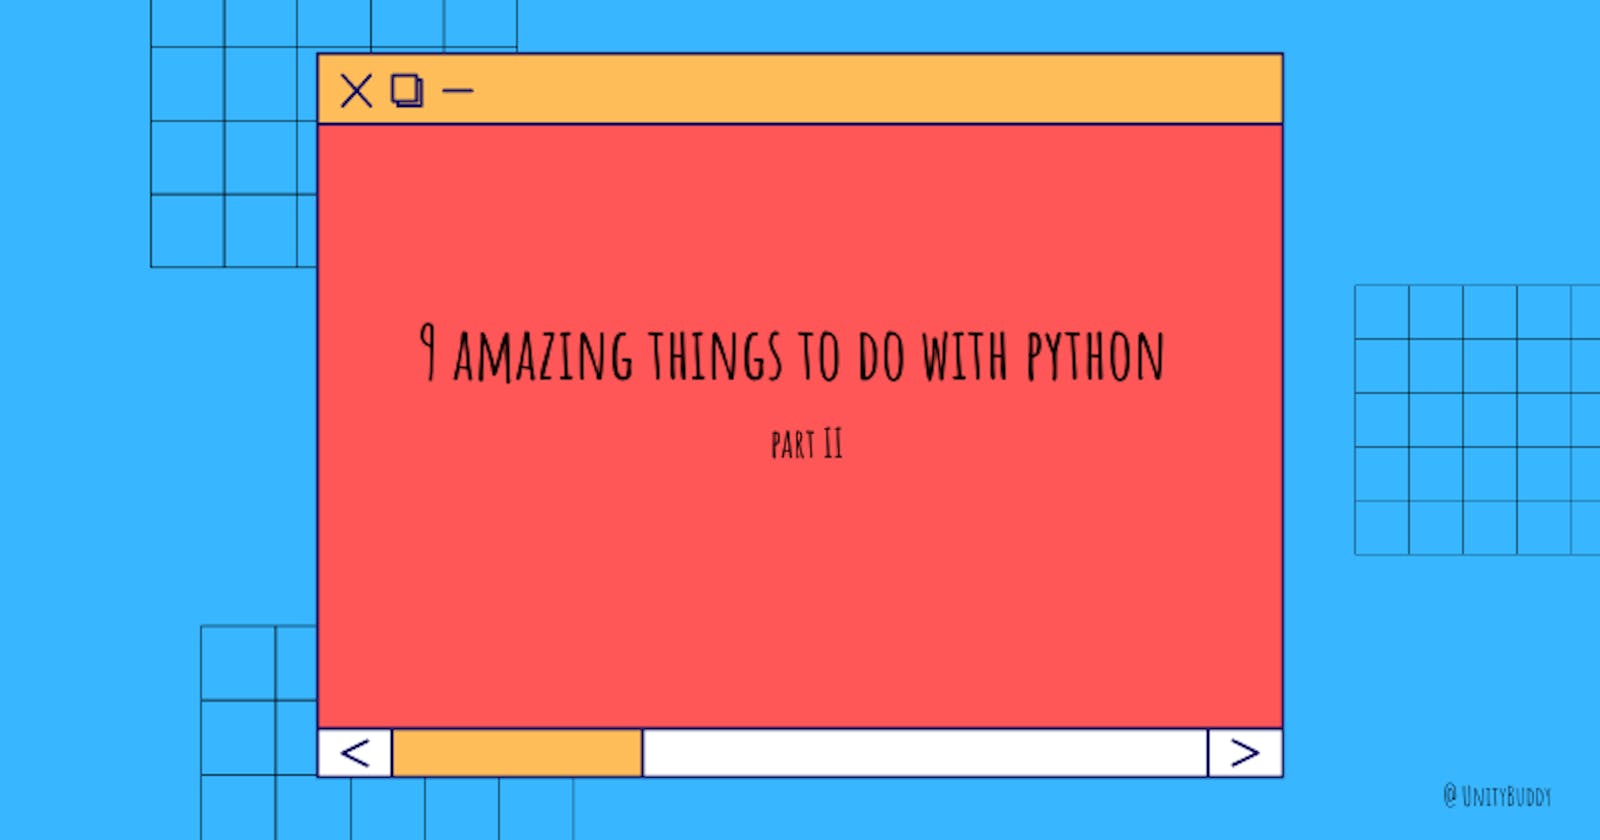 9 Amazing Things to Do with Python (Part II)